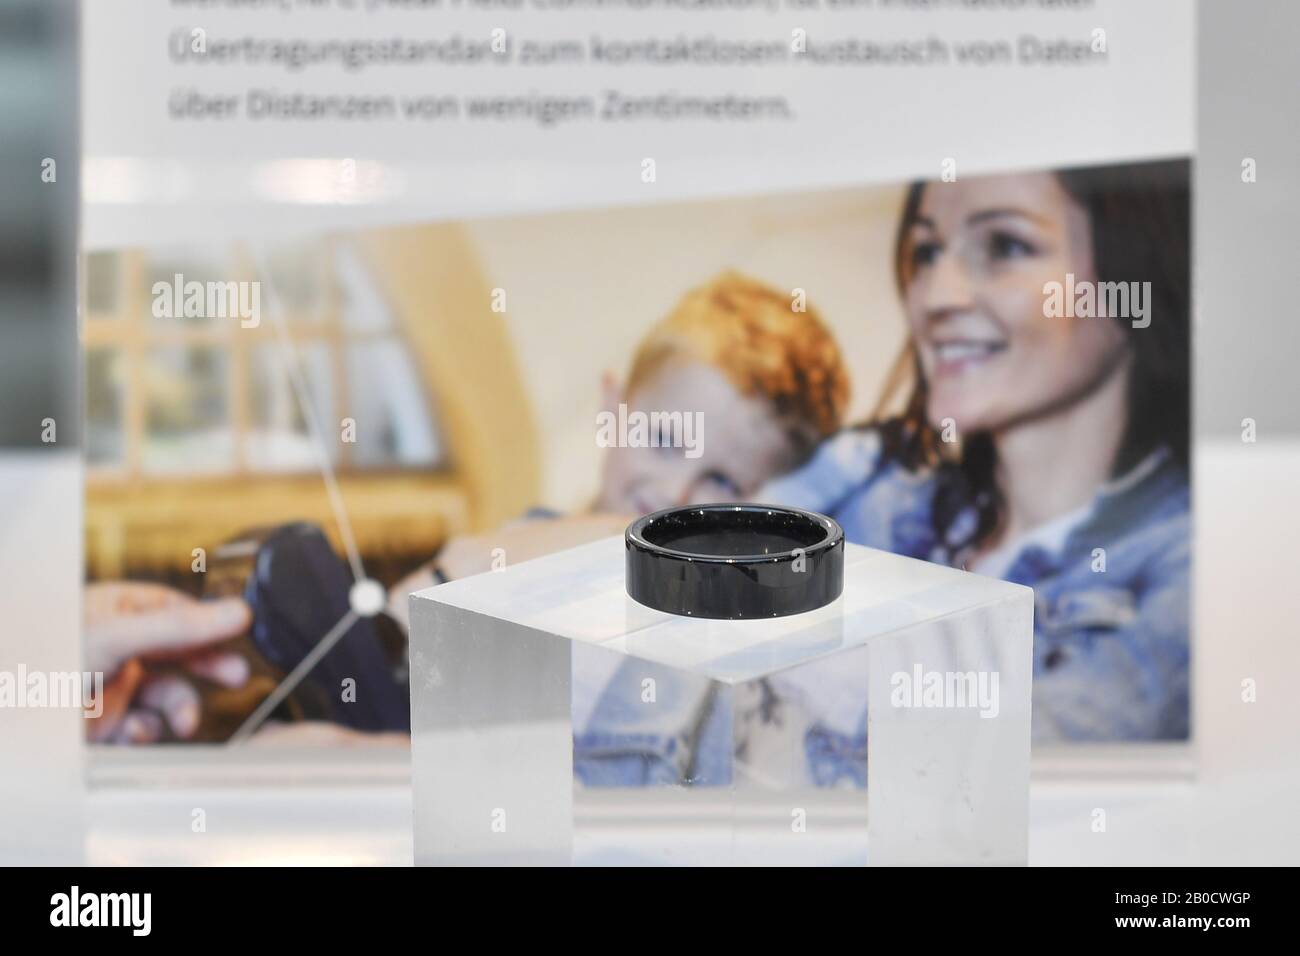 INFINEON payment ring. Product photography. Annual General Meeting INFINEON Technologies AG on February 20, 2020 at the ICM in Munich. | usage worldwide Stock Photo